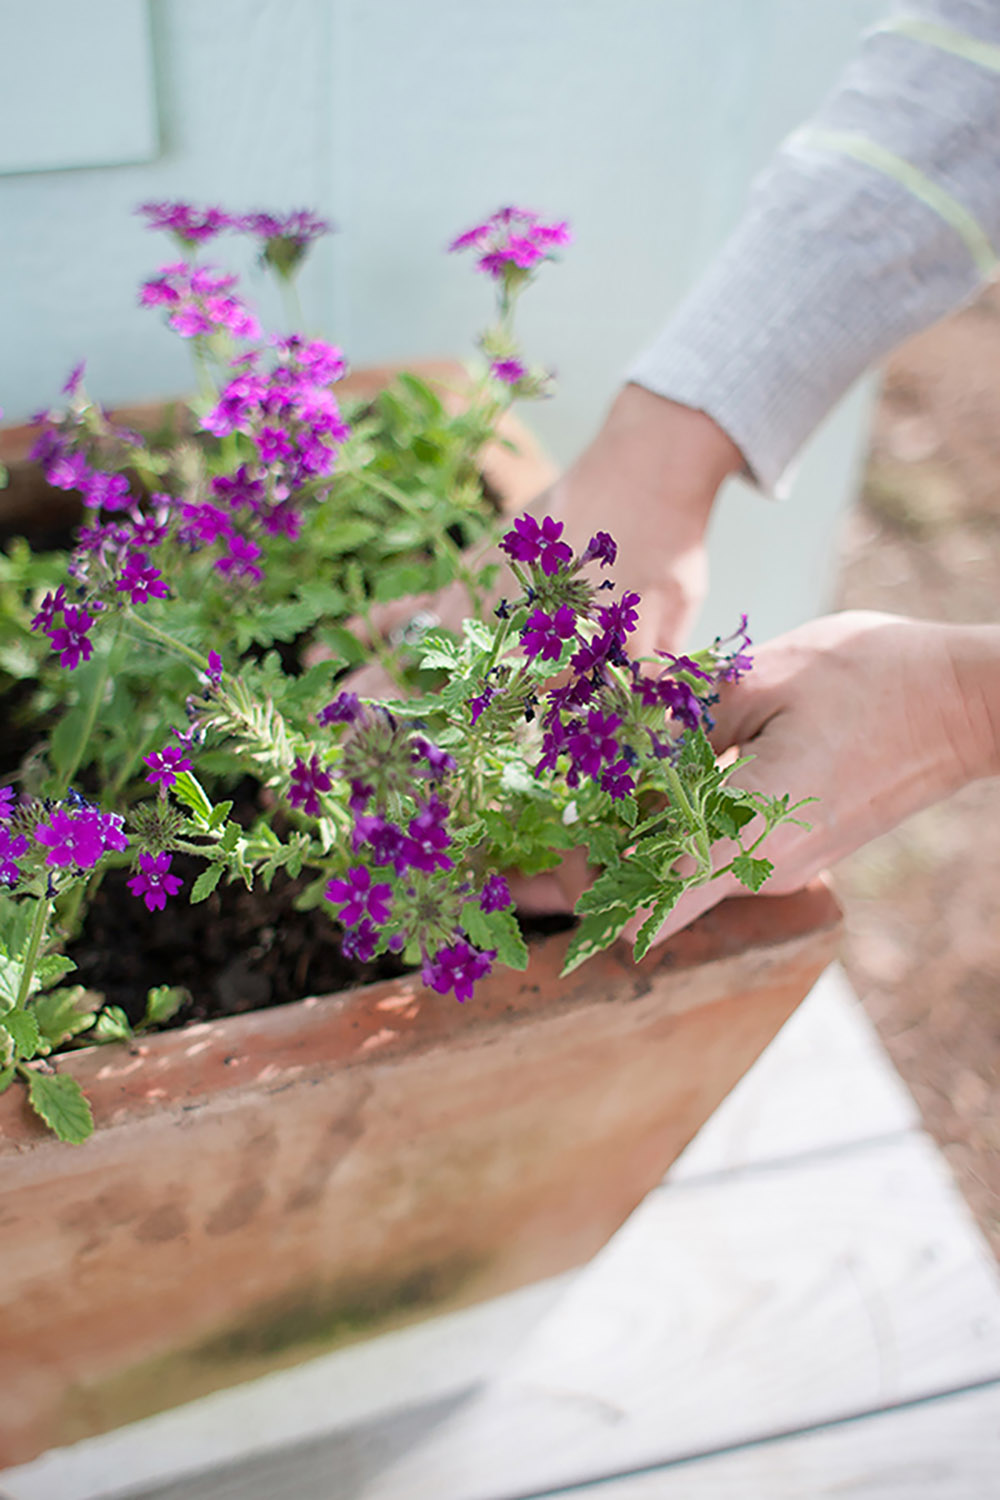 A person plants purple flowers in a planter.